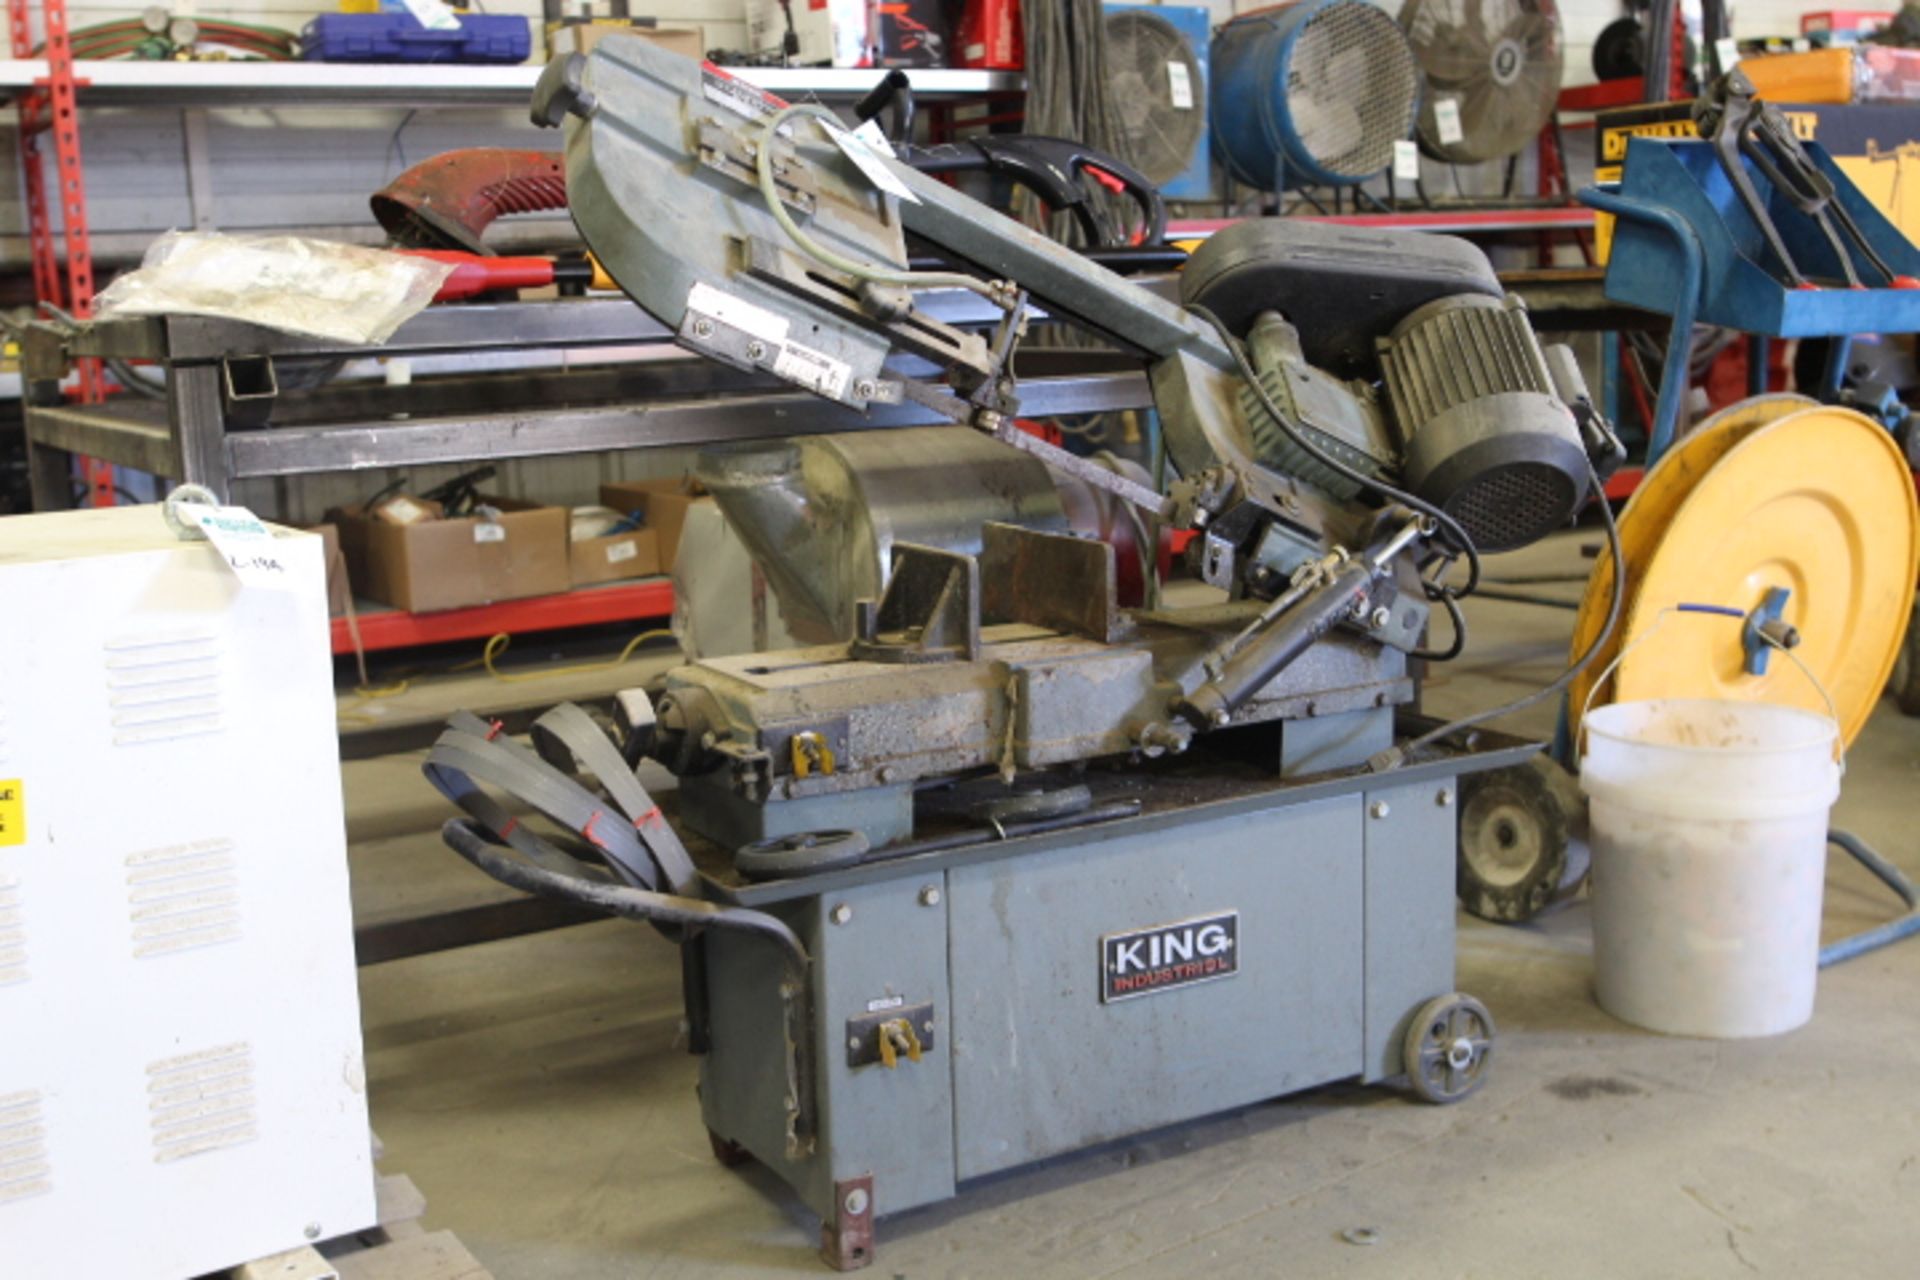 King Industrial Metal Cutting Band Saw 120 volt - Image 3 of 4